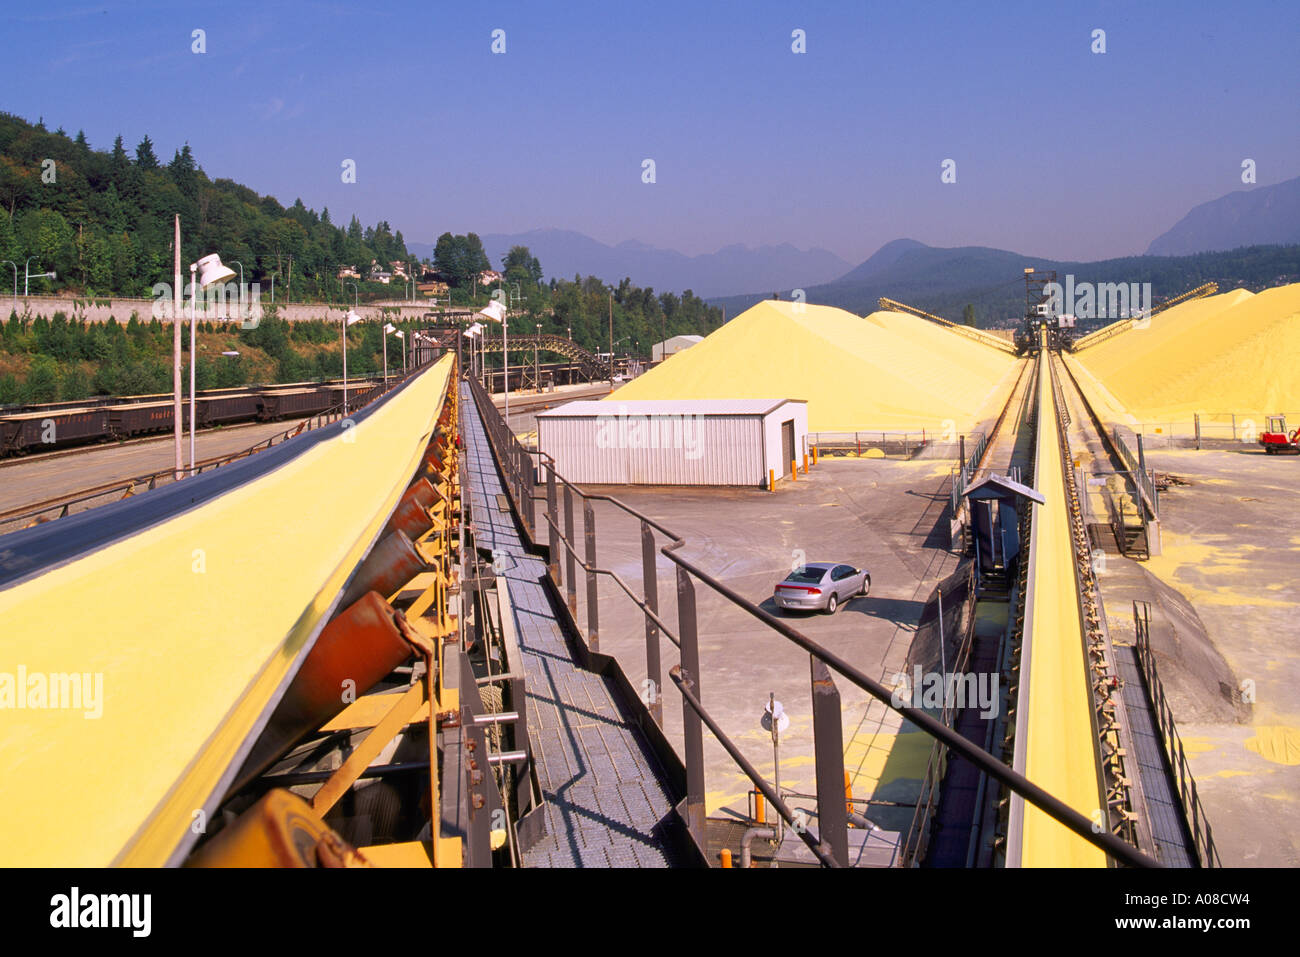 Port Moody, Port of Vancouver, BC, British Columbia, Canada - Sulphur Pile Storage at Shipping Terminal Facility, Industry Stock Photo